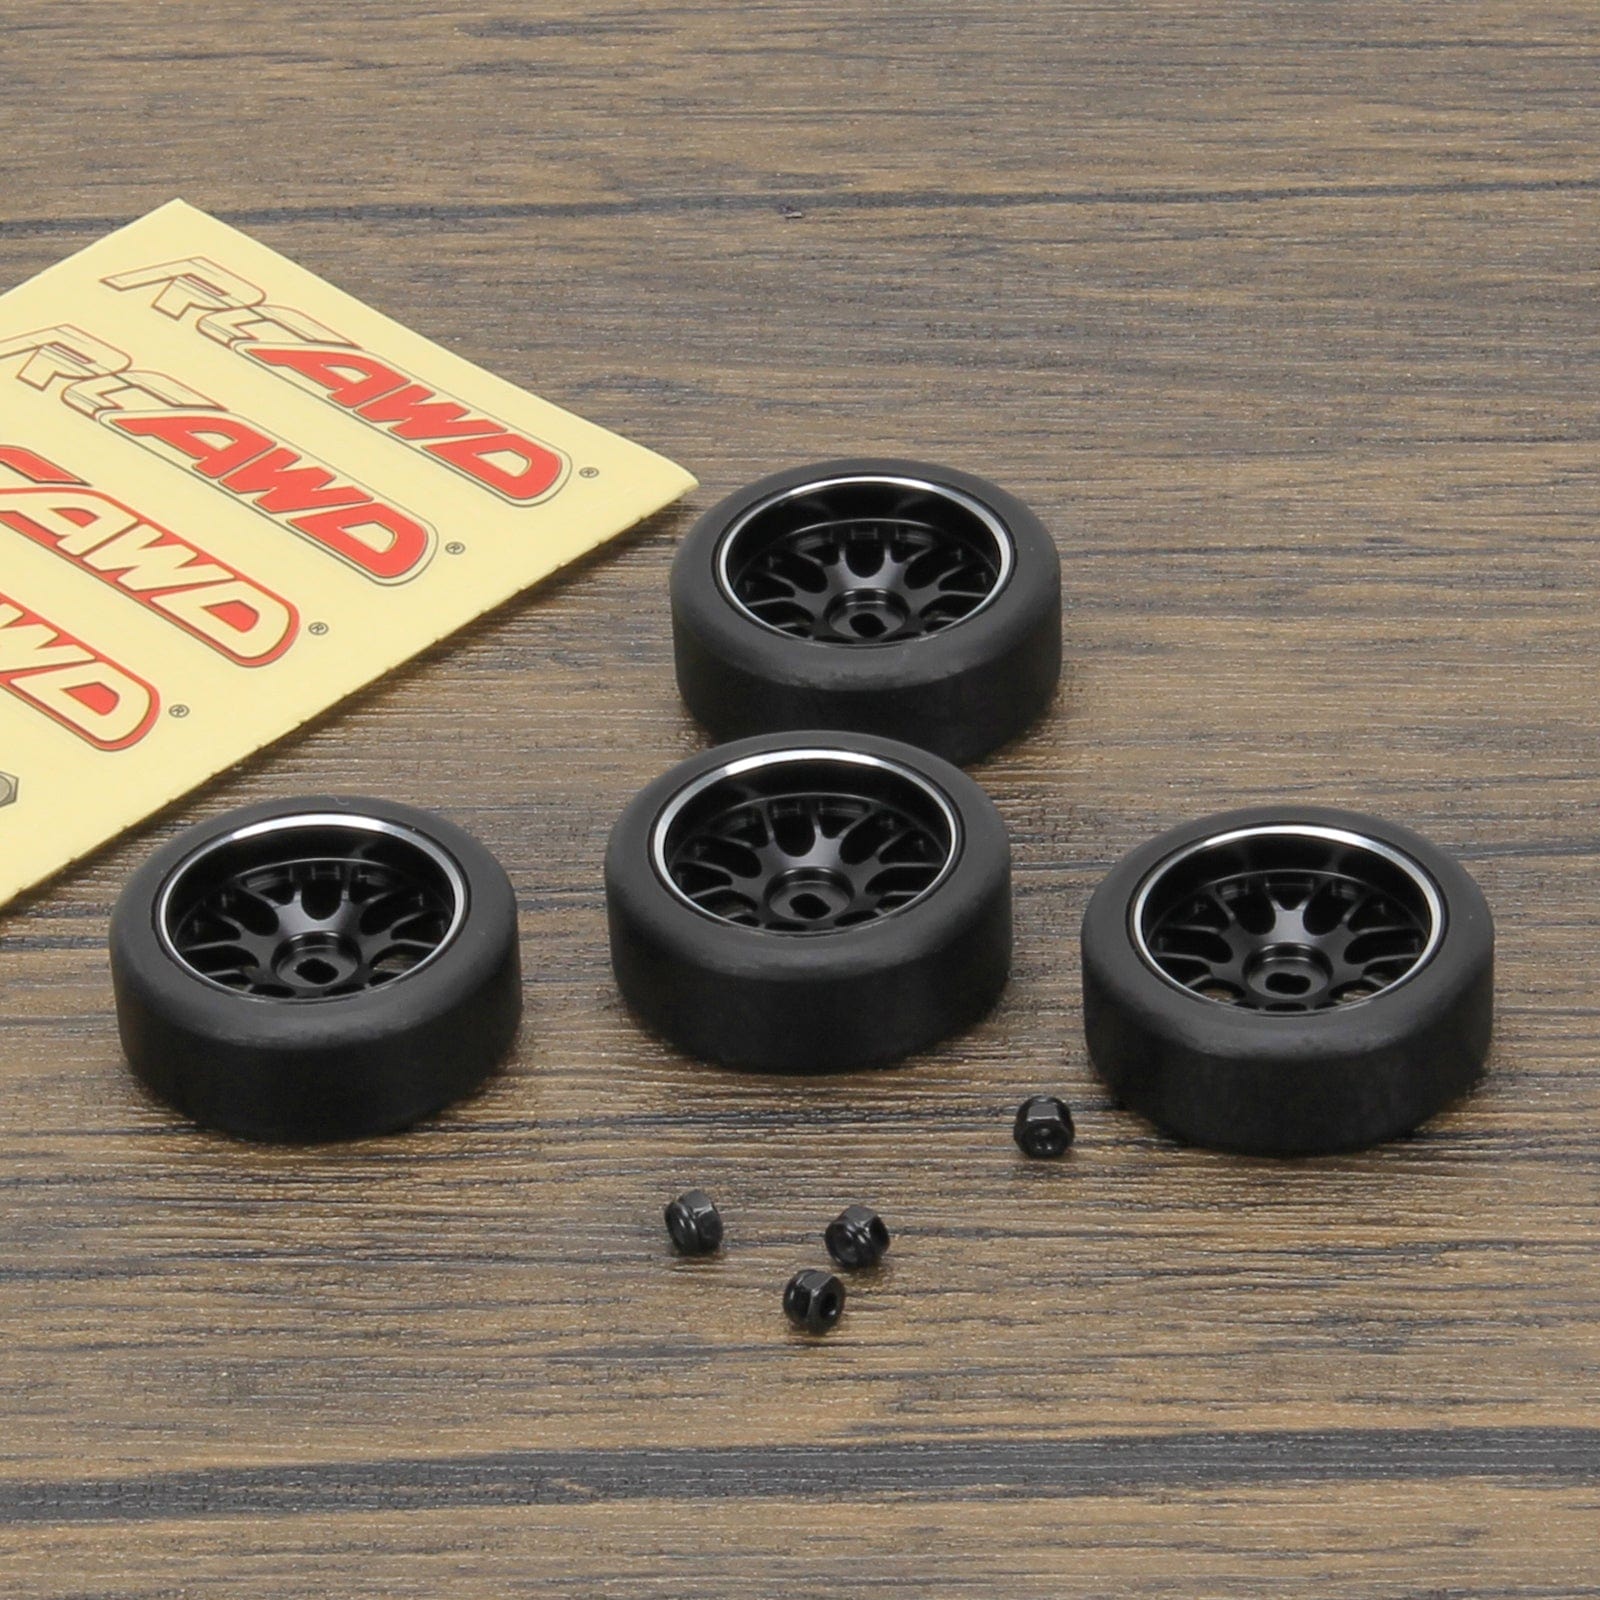 RCAWD WLTOYS K969 K989 P929 Black RCAWD Wltoys Upgrades 29mm Reticulation Drift Wheel Tires for 1/28 Wltoys K969 K989 P929